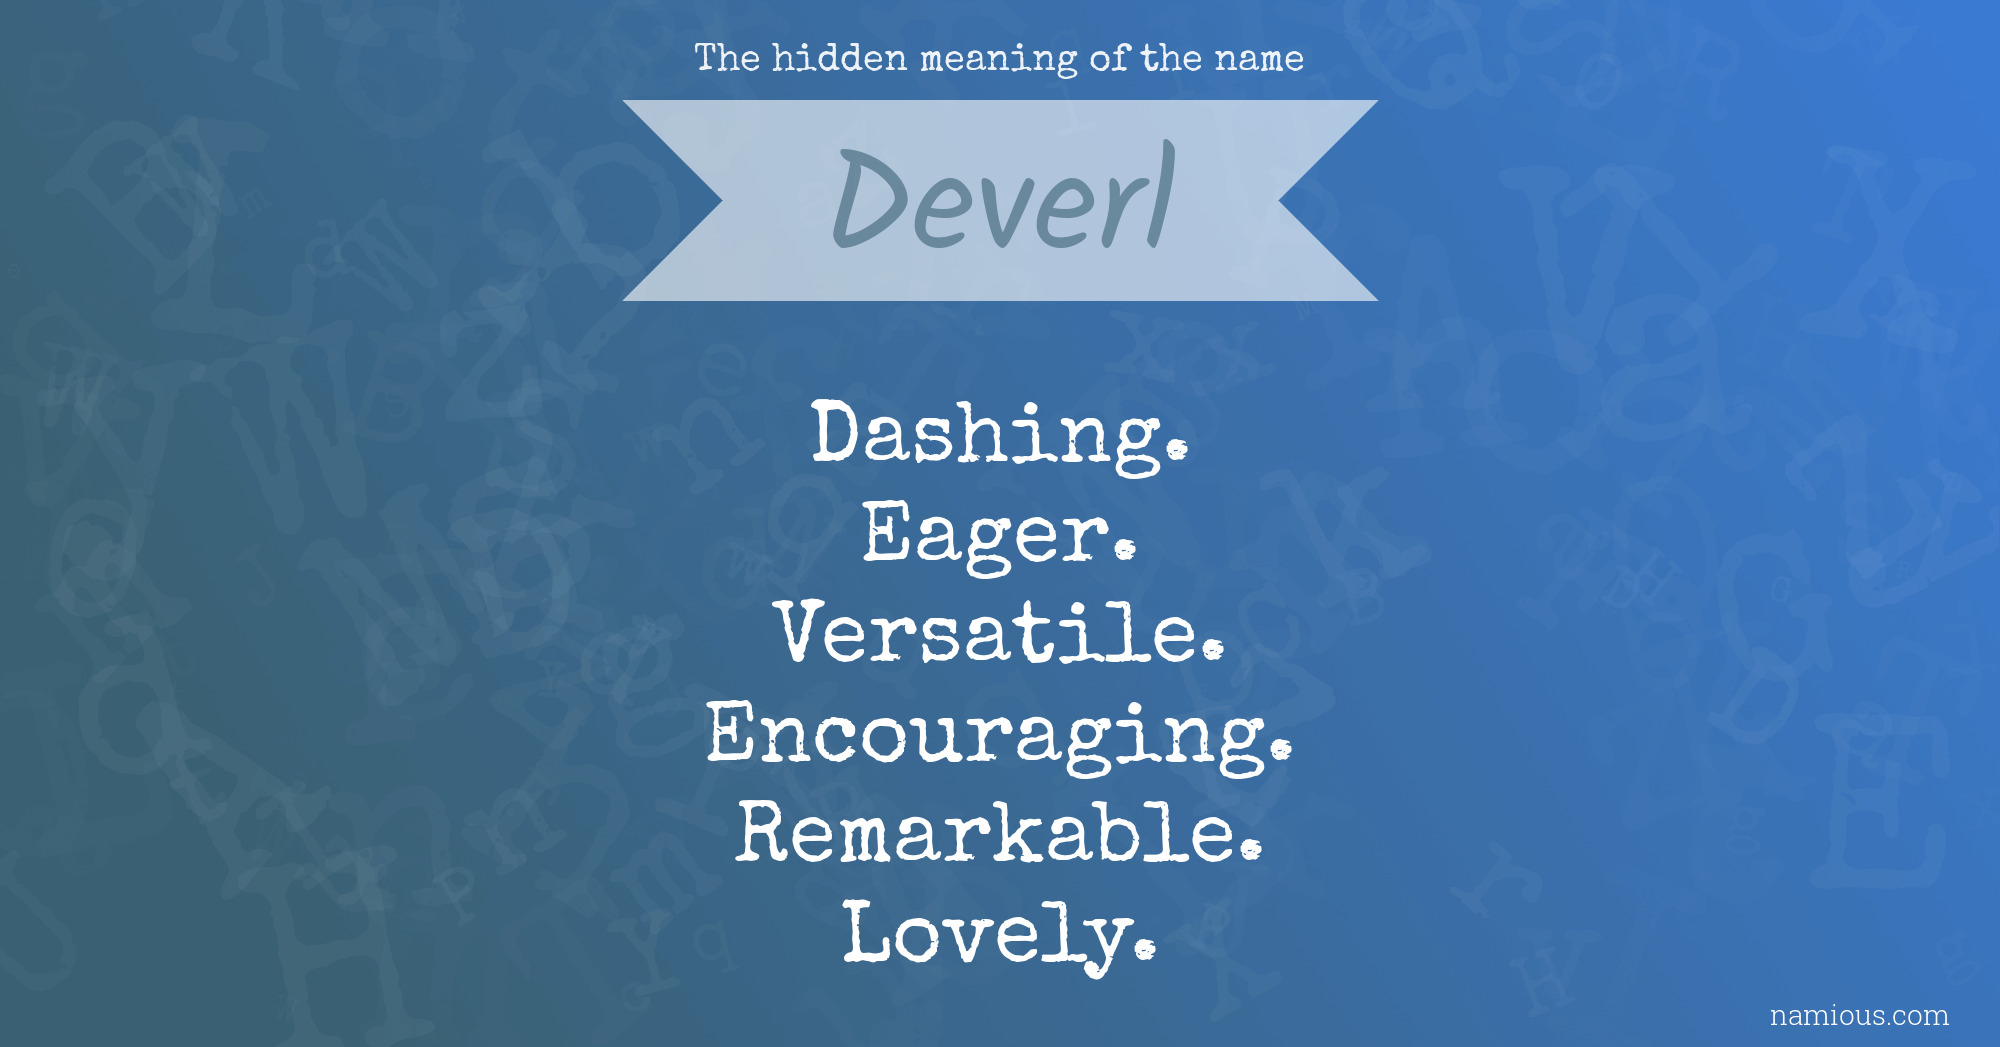 The hidden meaning of the name Deverl